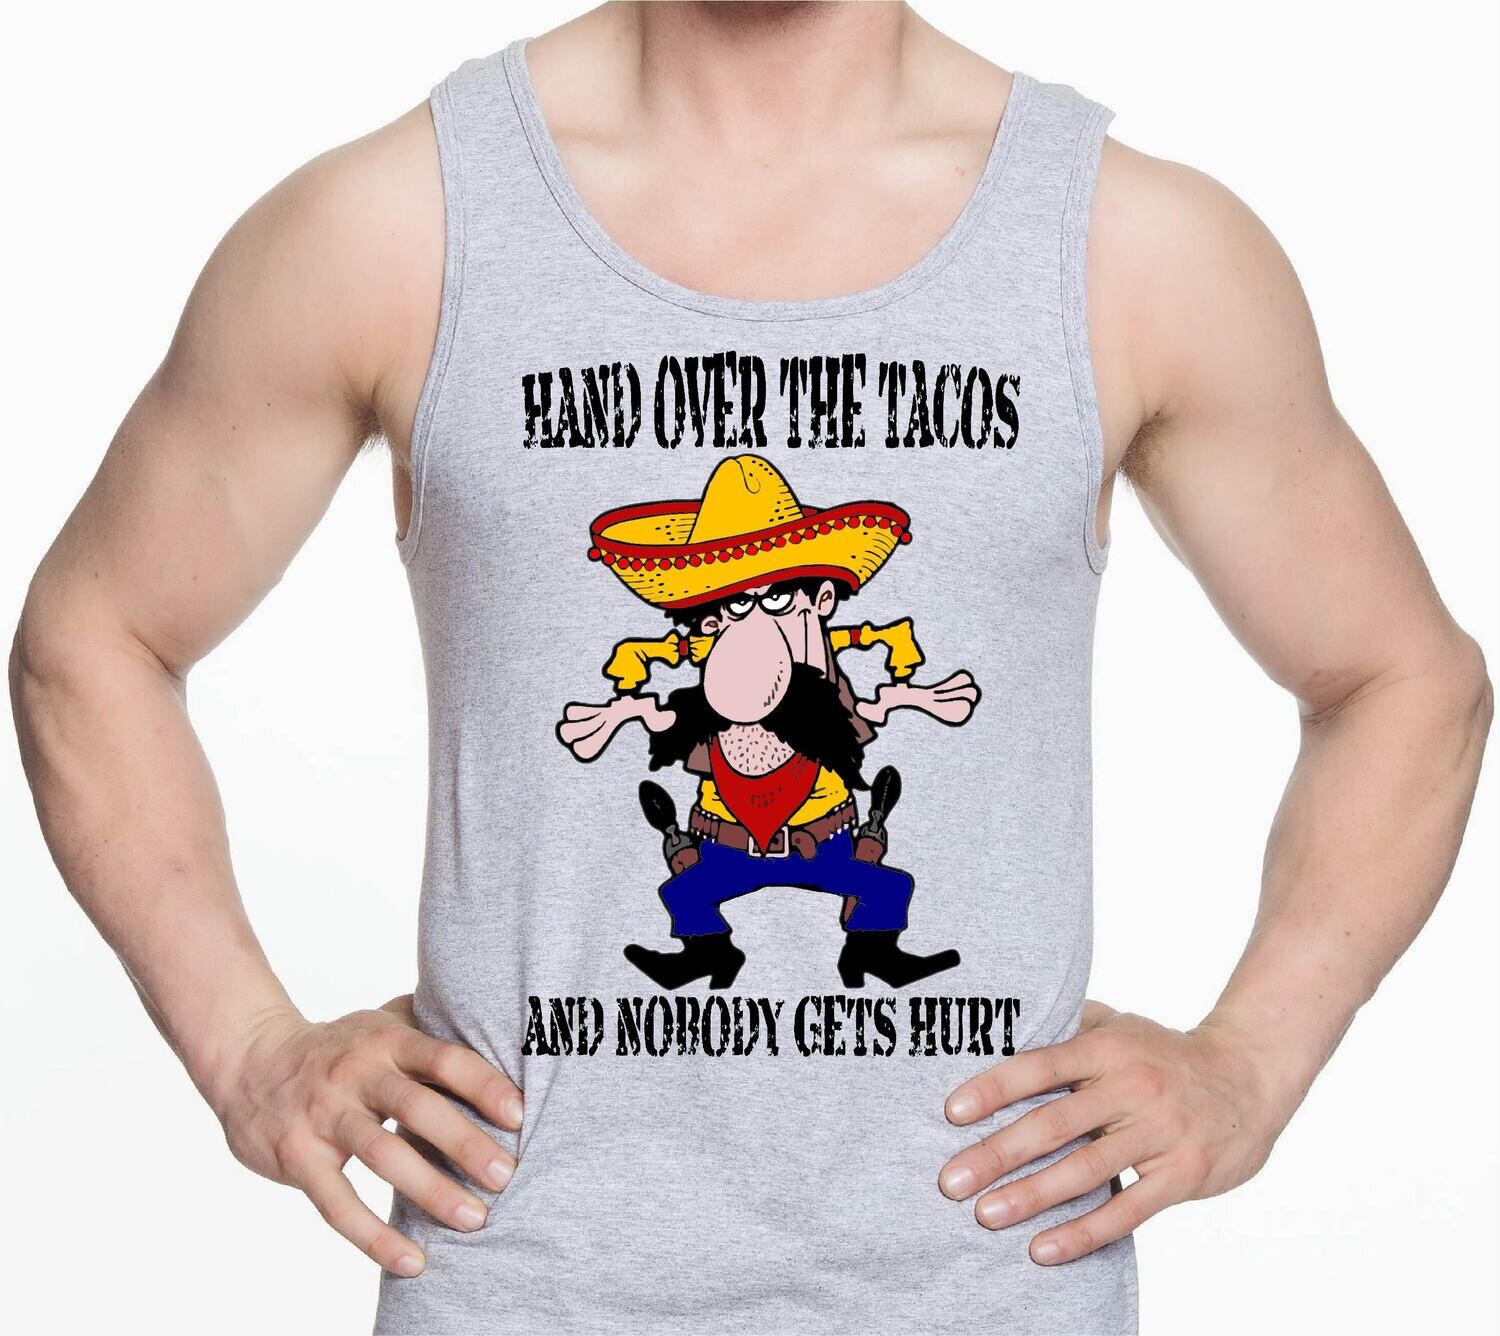 HAND OVER THE TACOS TANK TOP